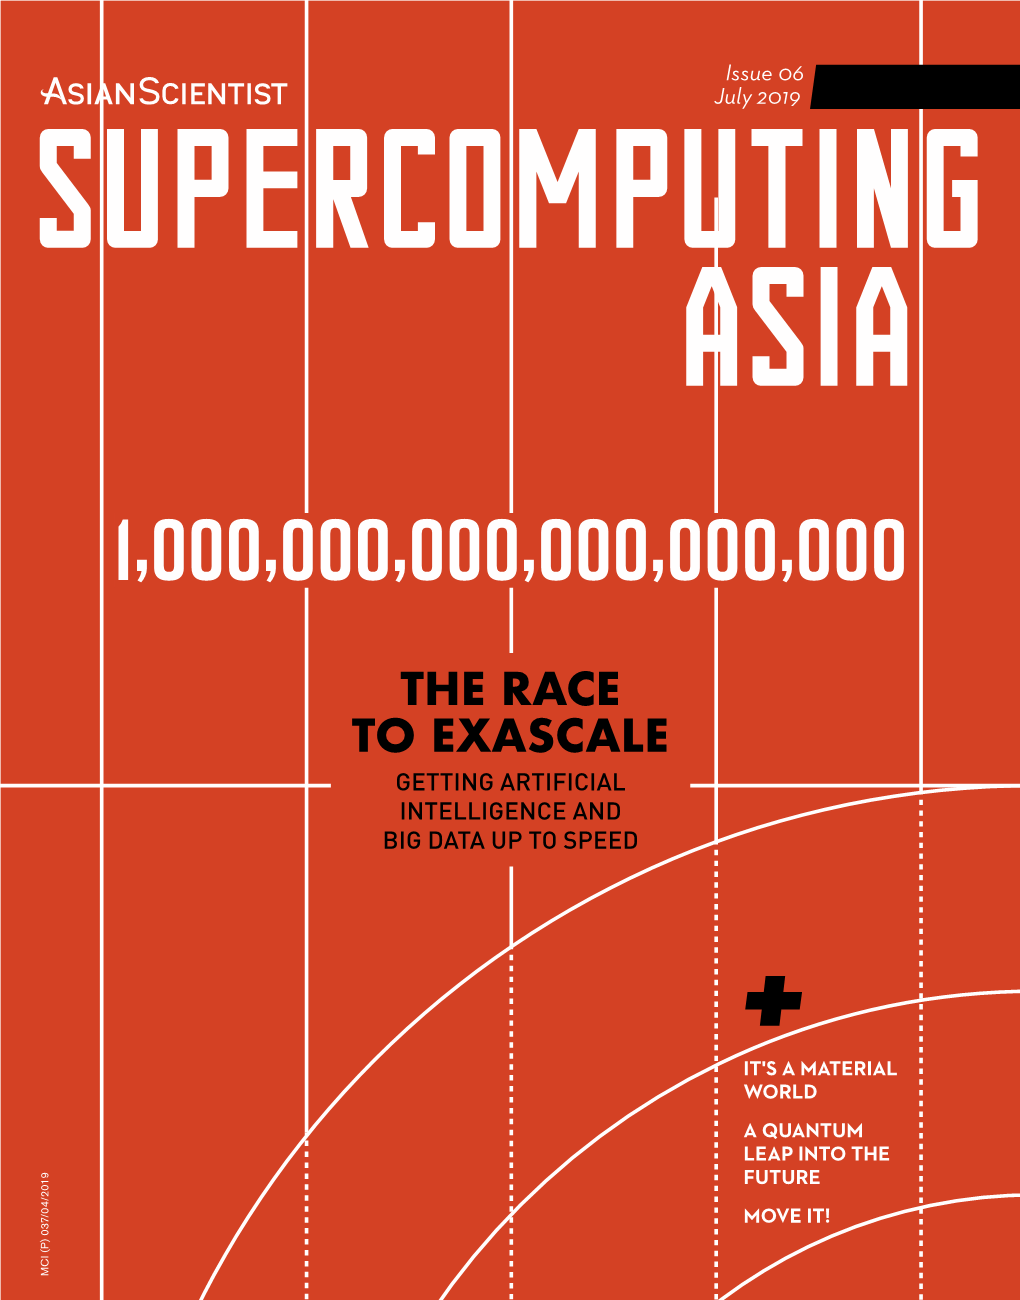 The Race to Exascale Getting Artificial Intelligence and Big Data up to Speed